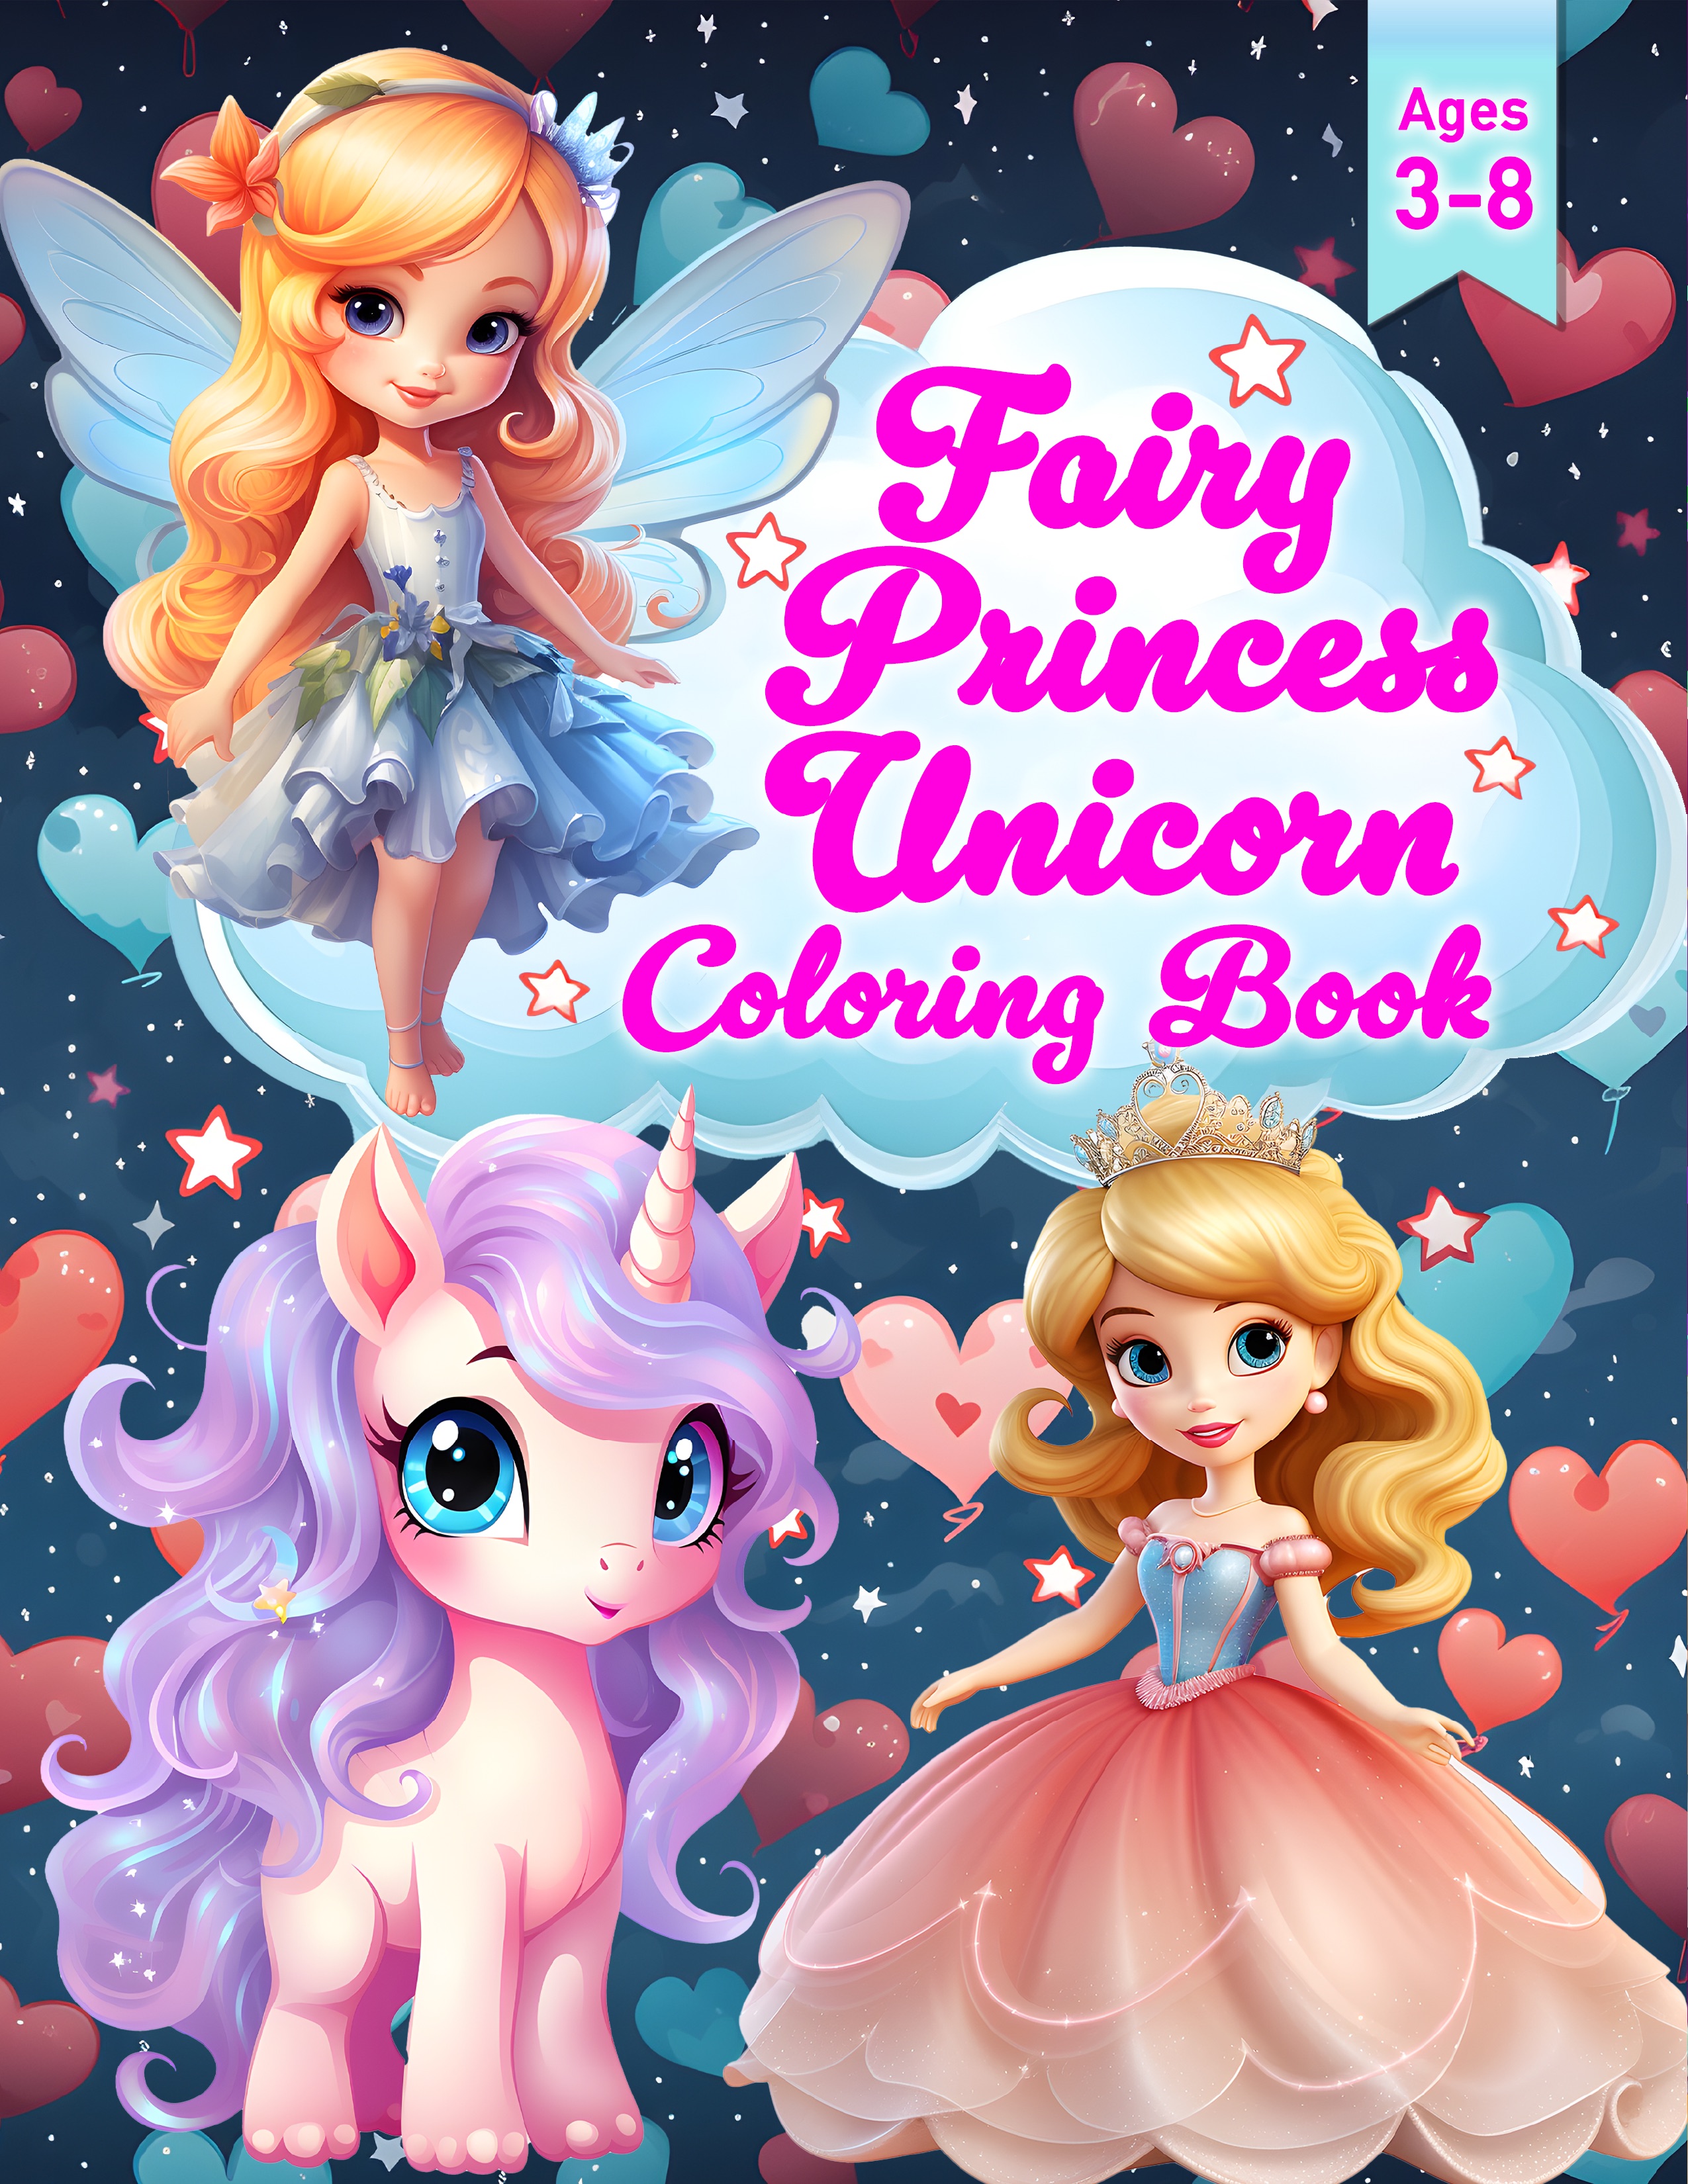 Fairy Princess Unicorn Coloring Book Ages 3-8: Fly into a Magical World of Coloring Fun! Adorable Creativity for Preschool, Kindergarten, and Girls Fine Motor Skills